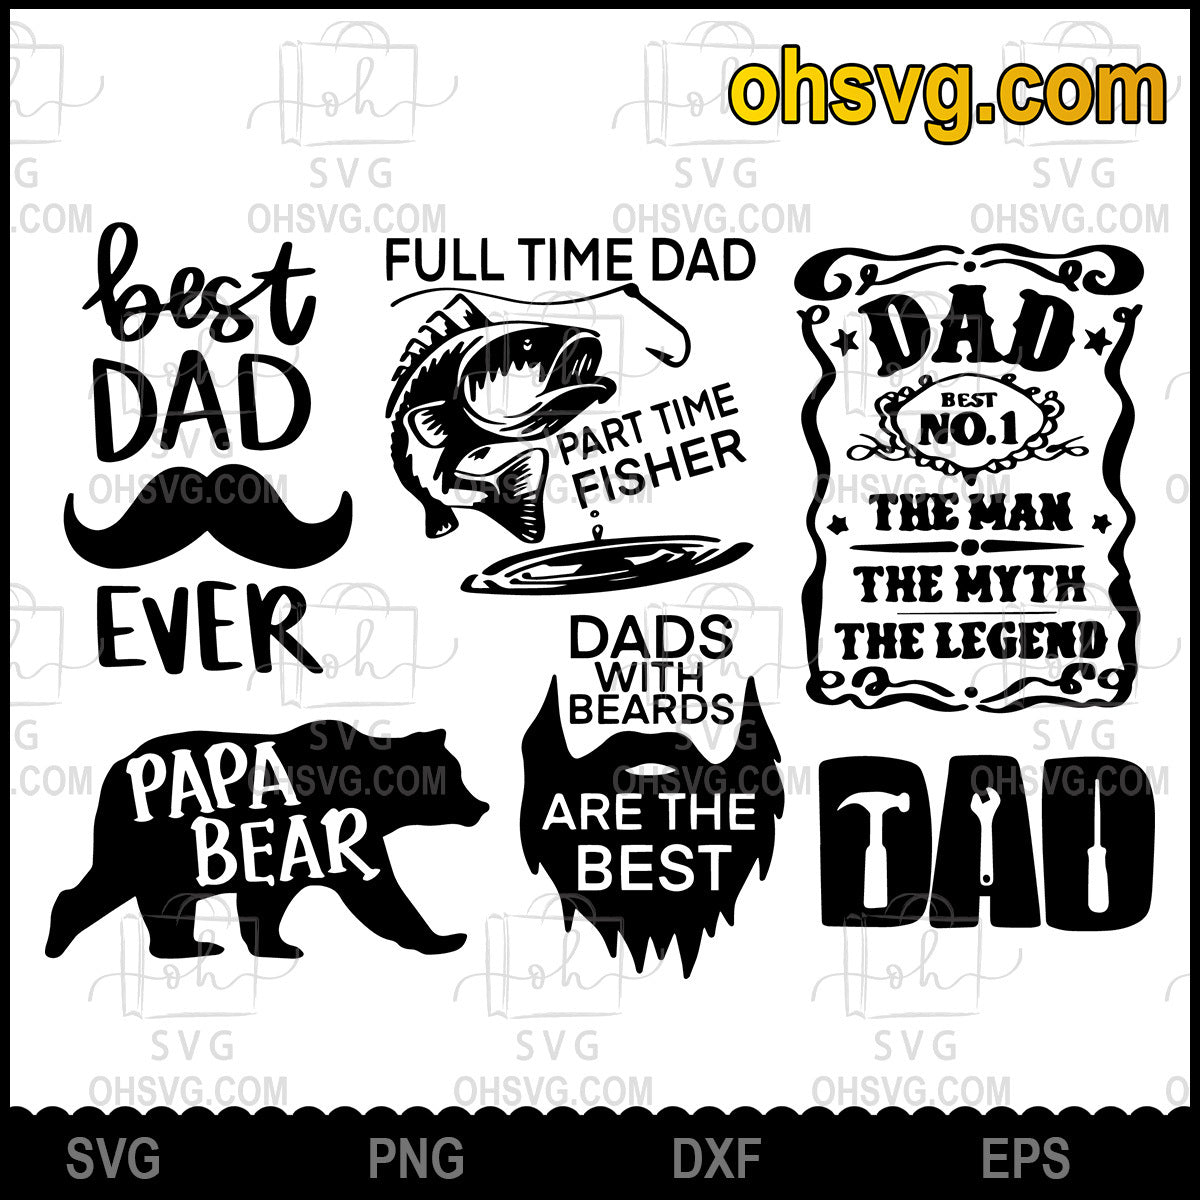 Best Dad Ever, Papa Bear Dads With Beards, Fishing Dad, Fixing Dad